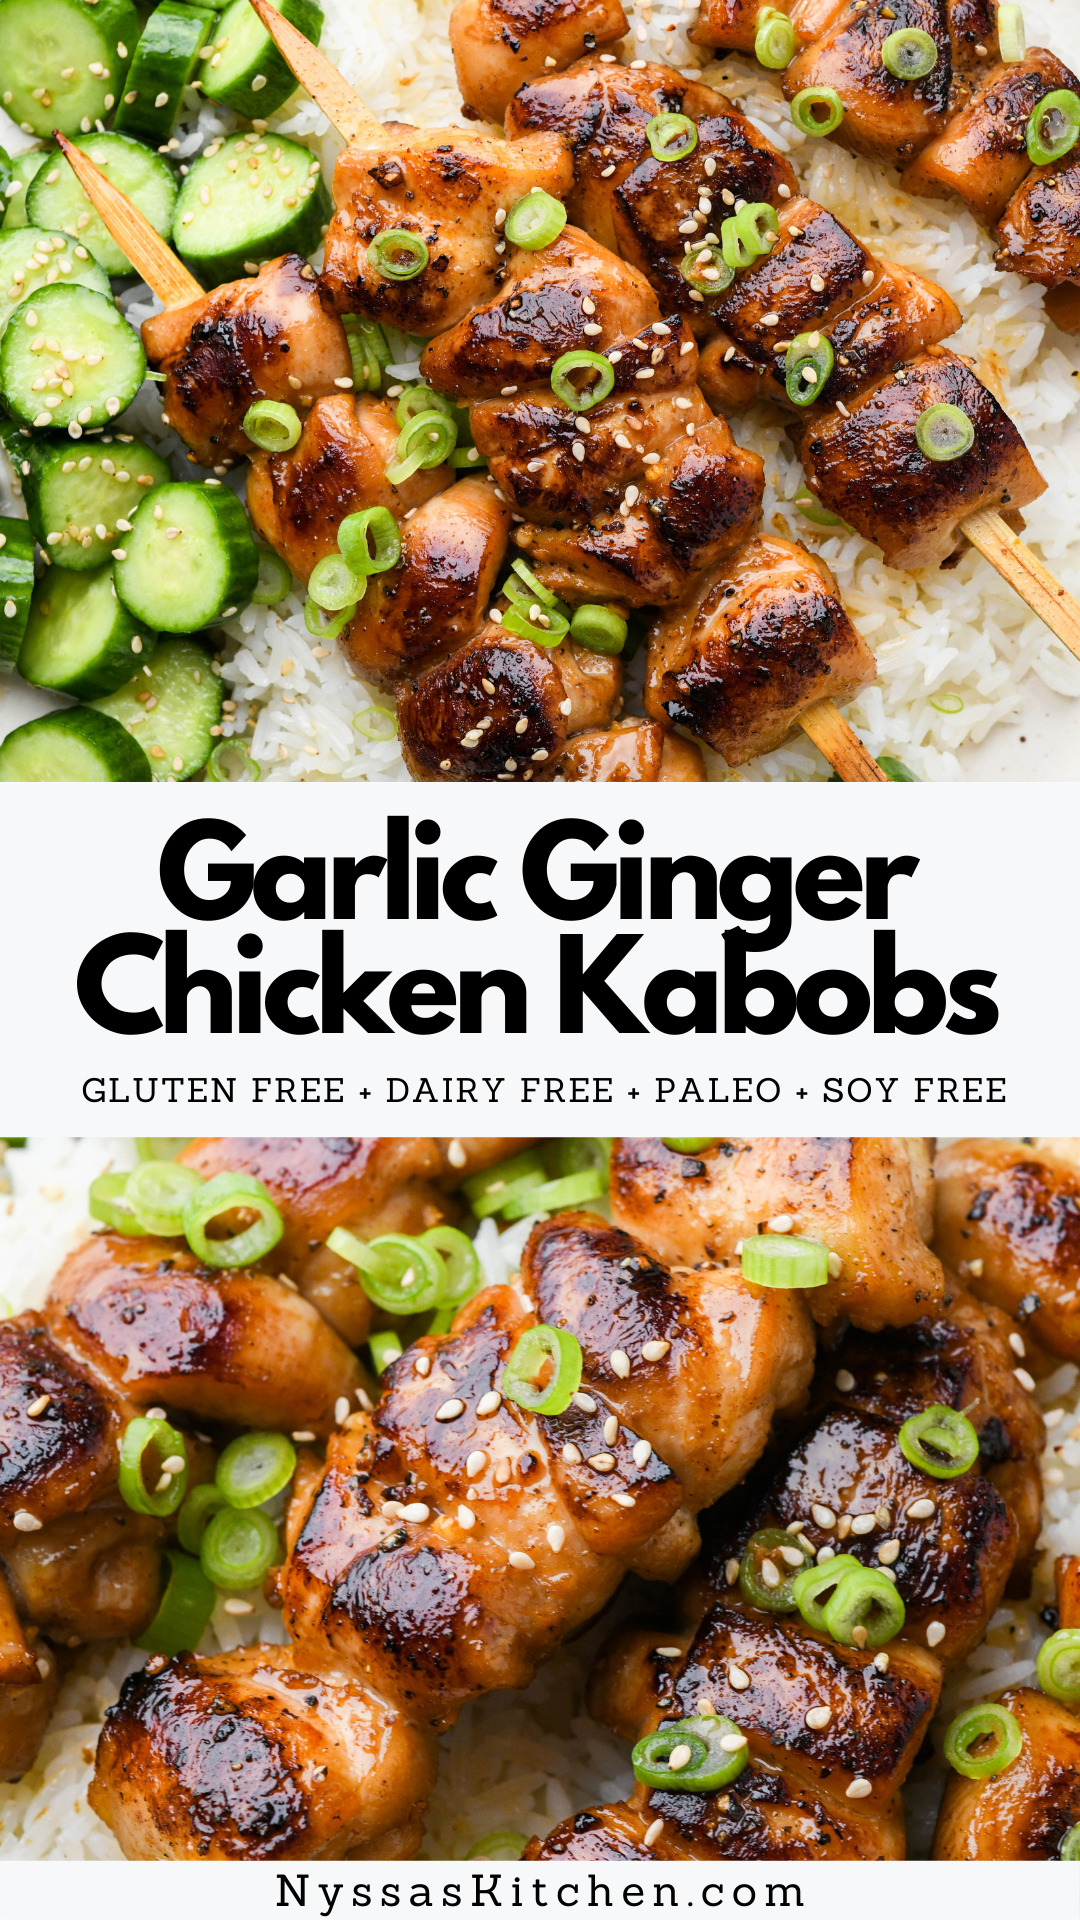 These garlic ginger chicken kabobs are such a flavorful and delicious Asian inspired kebab recipe! Made with juicy chicken thighs and an easy soy free marinade, and just as easy to make in the oven as they are to throw on the grill. A real crowd pleaser that you've got to try this summer at a family BBQ! Gluten free, paleo, dairy free, Whole30 option.